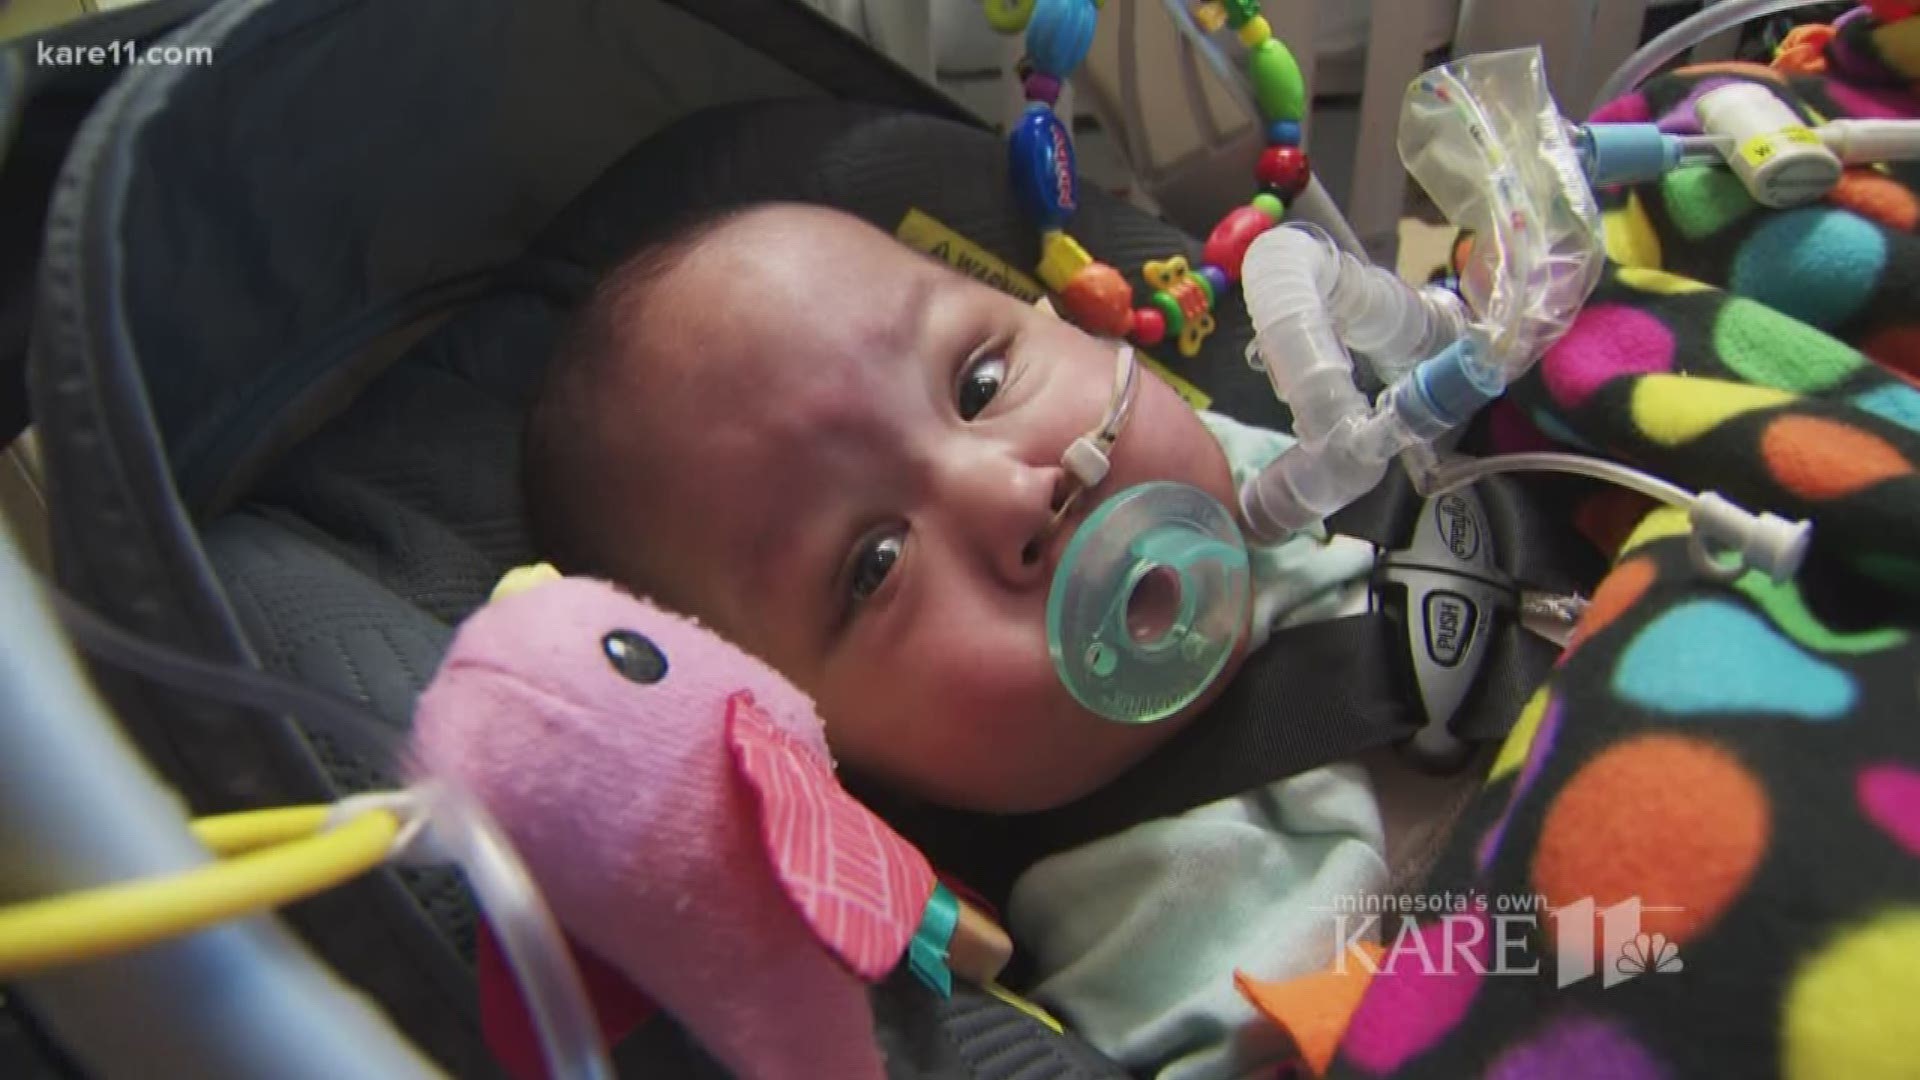 At just shy of 14 months old, Paislyn had never left that hospital... until today. https://kare11.tv/2Ji1x0r